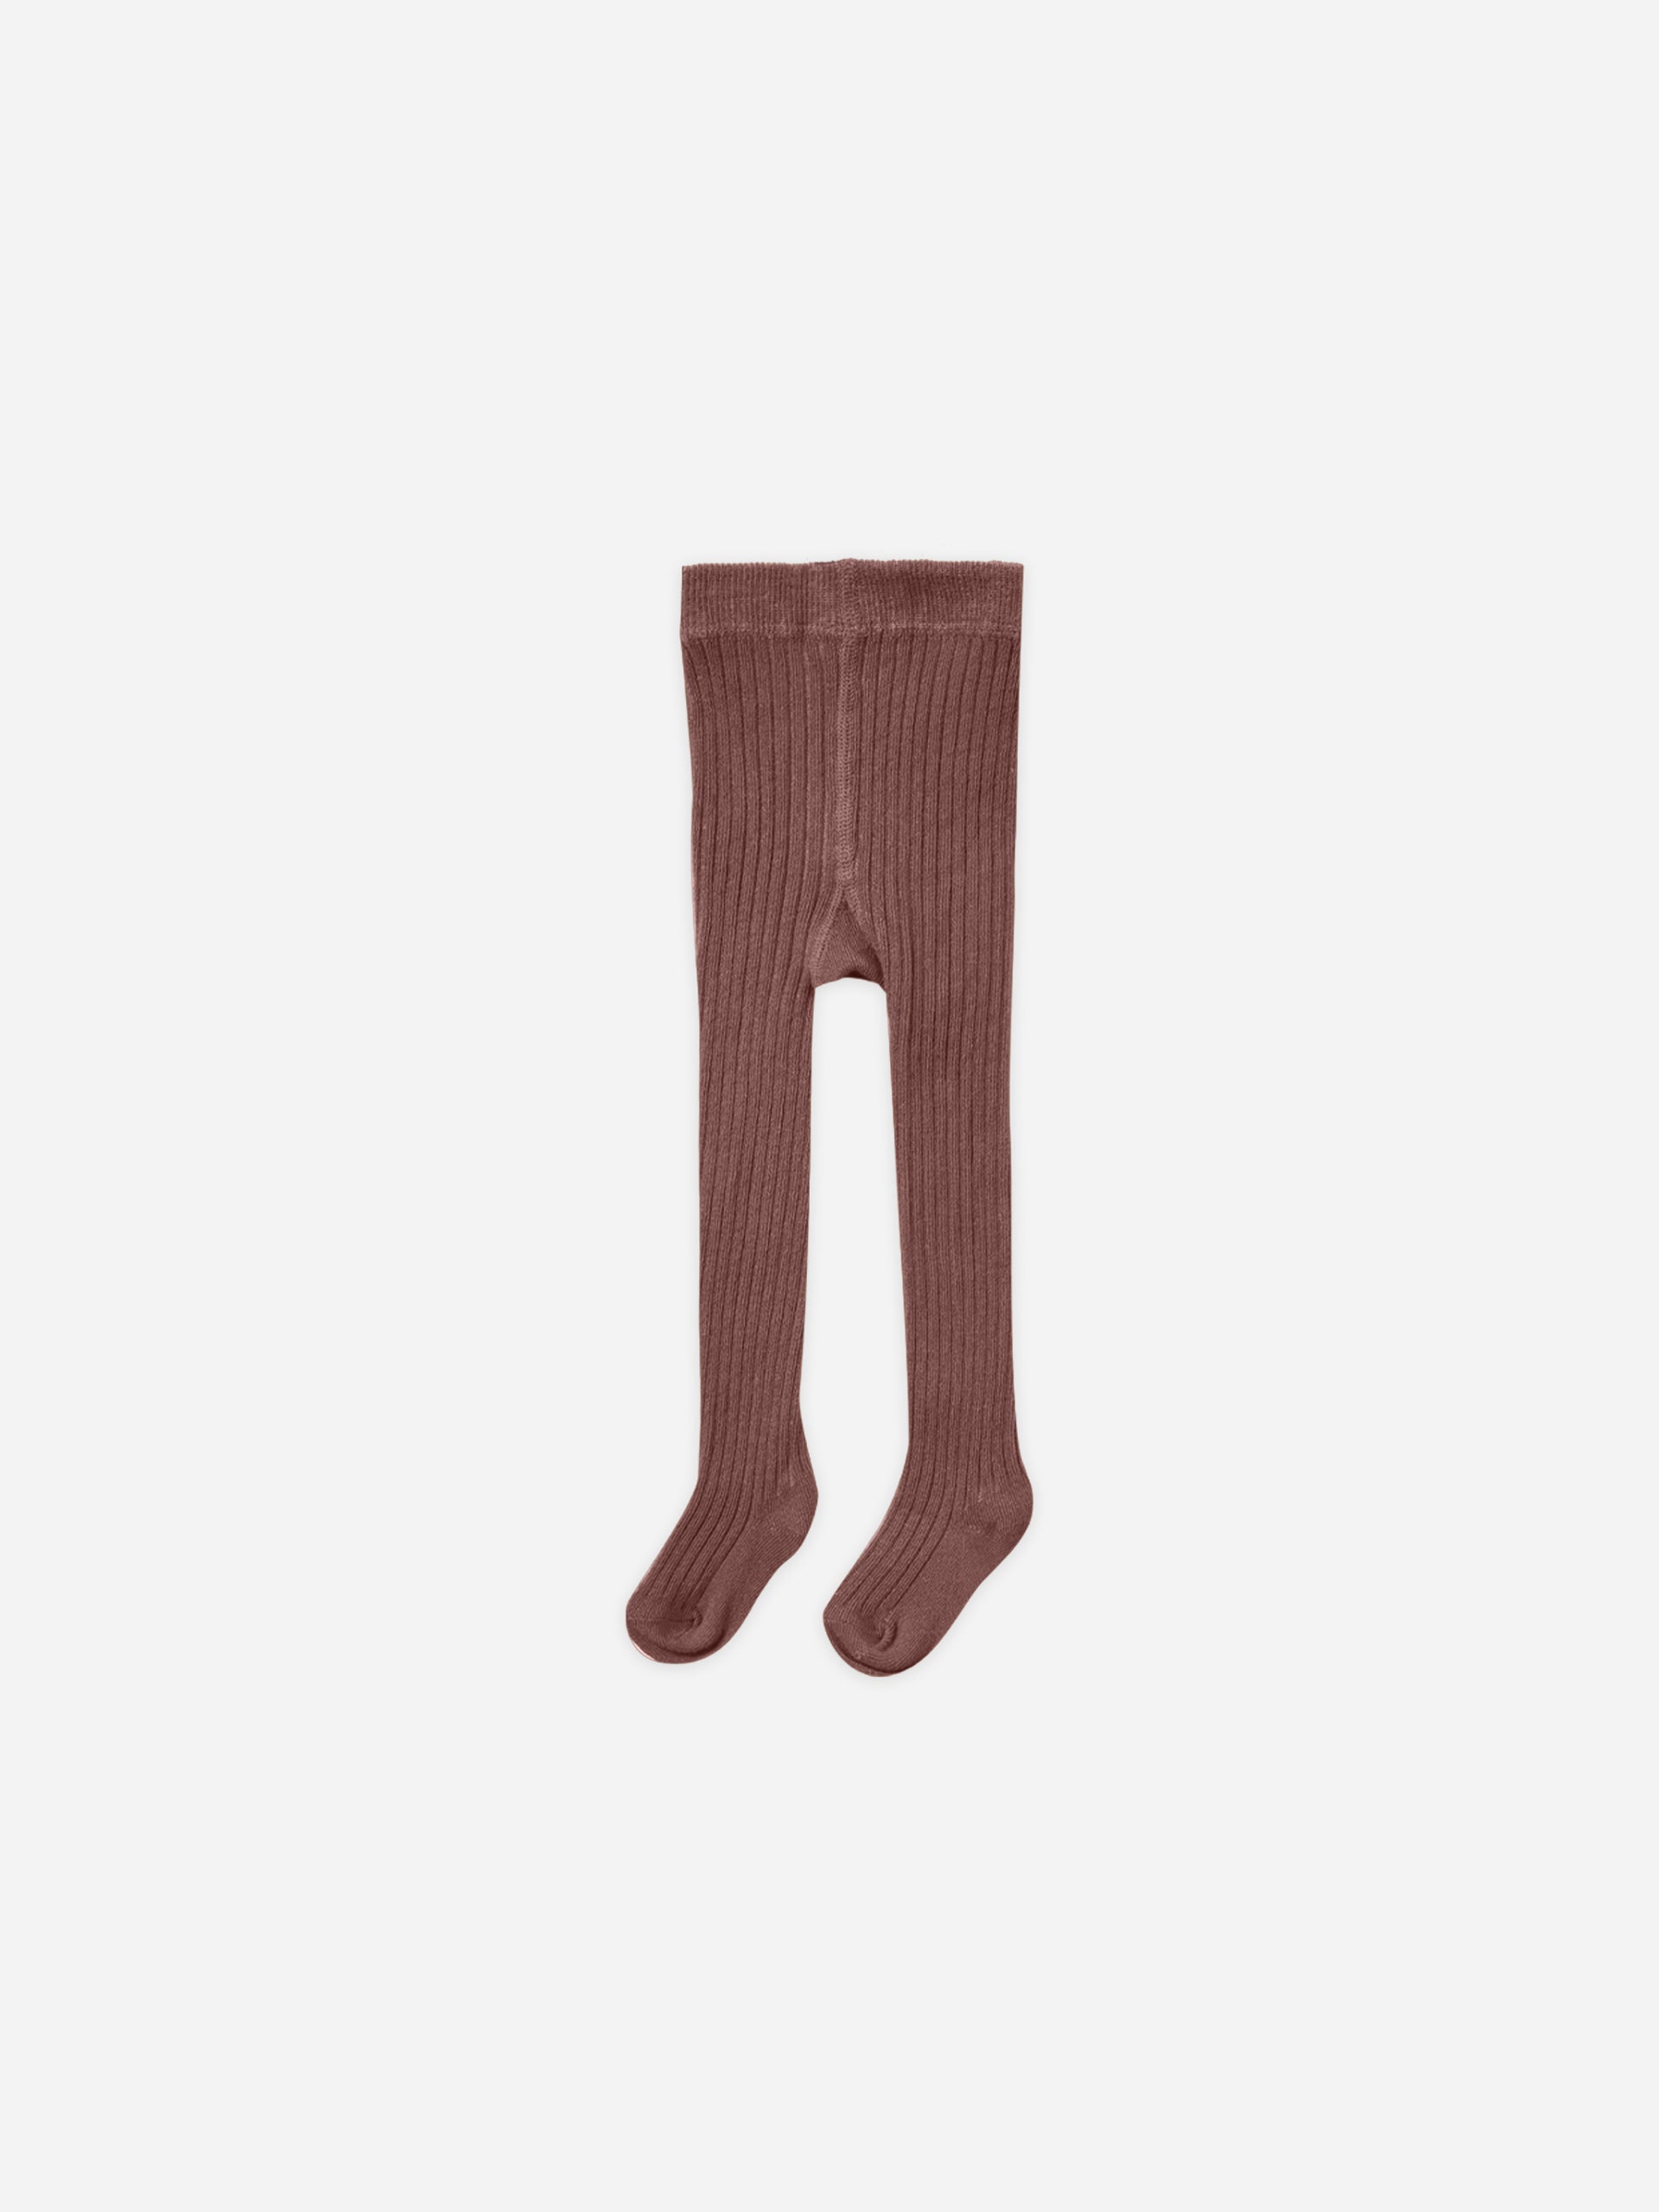 Tights || Plum - Rylee + Cru | Kids Clothes | Trendy Baby Clothes | Modern Infant Outfits |